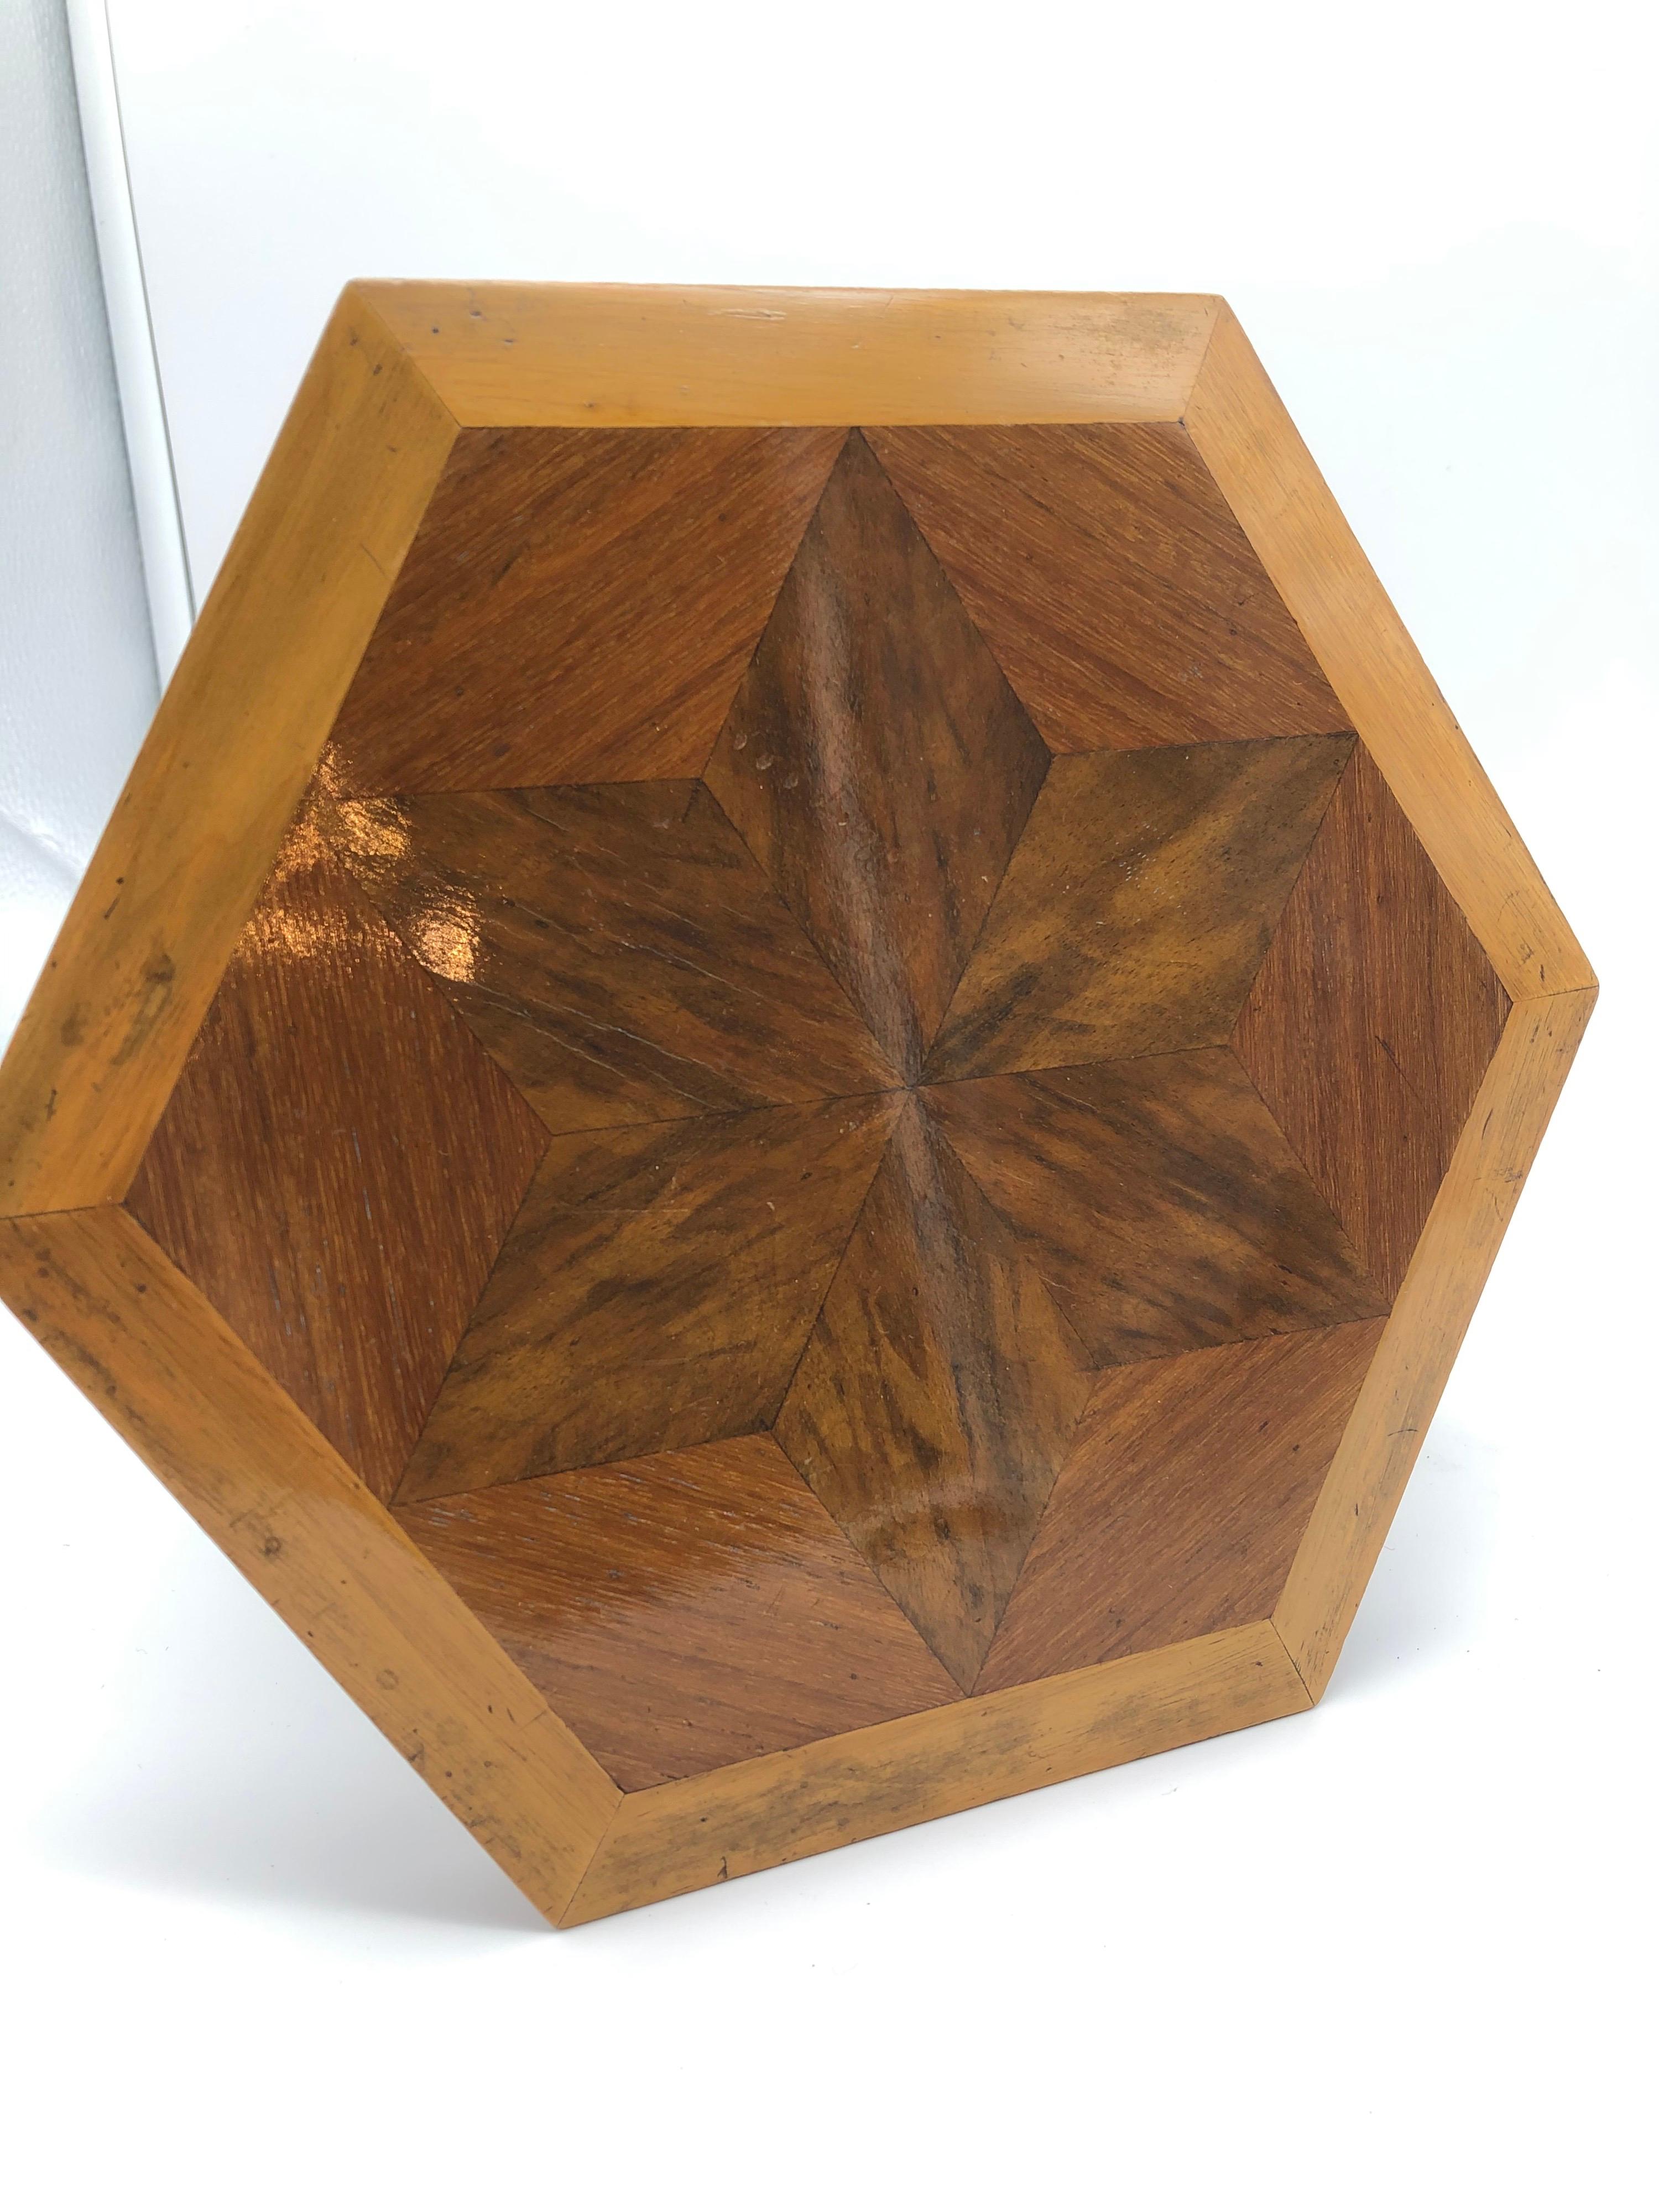 Octagonal Jewelry Box Star Inlaid Wood Antique For Sale 1